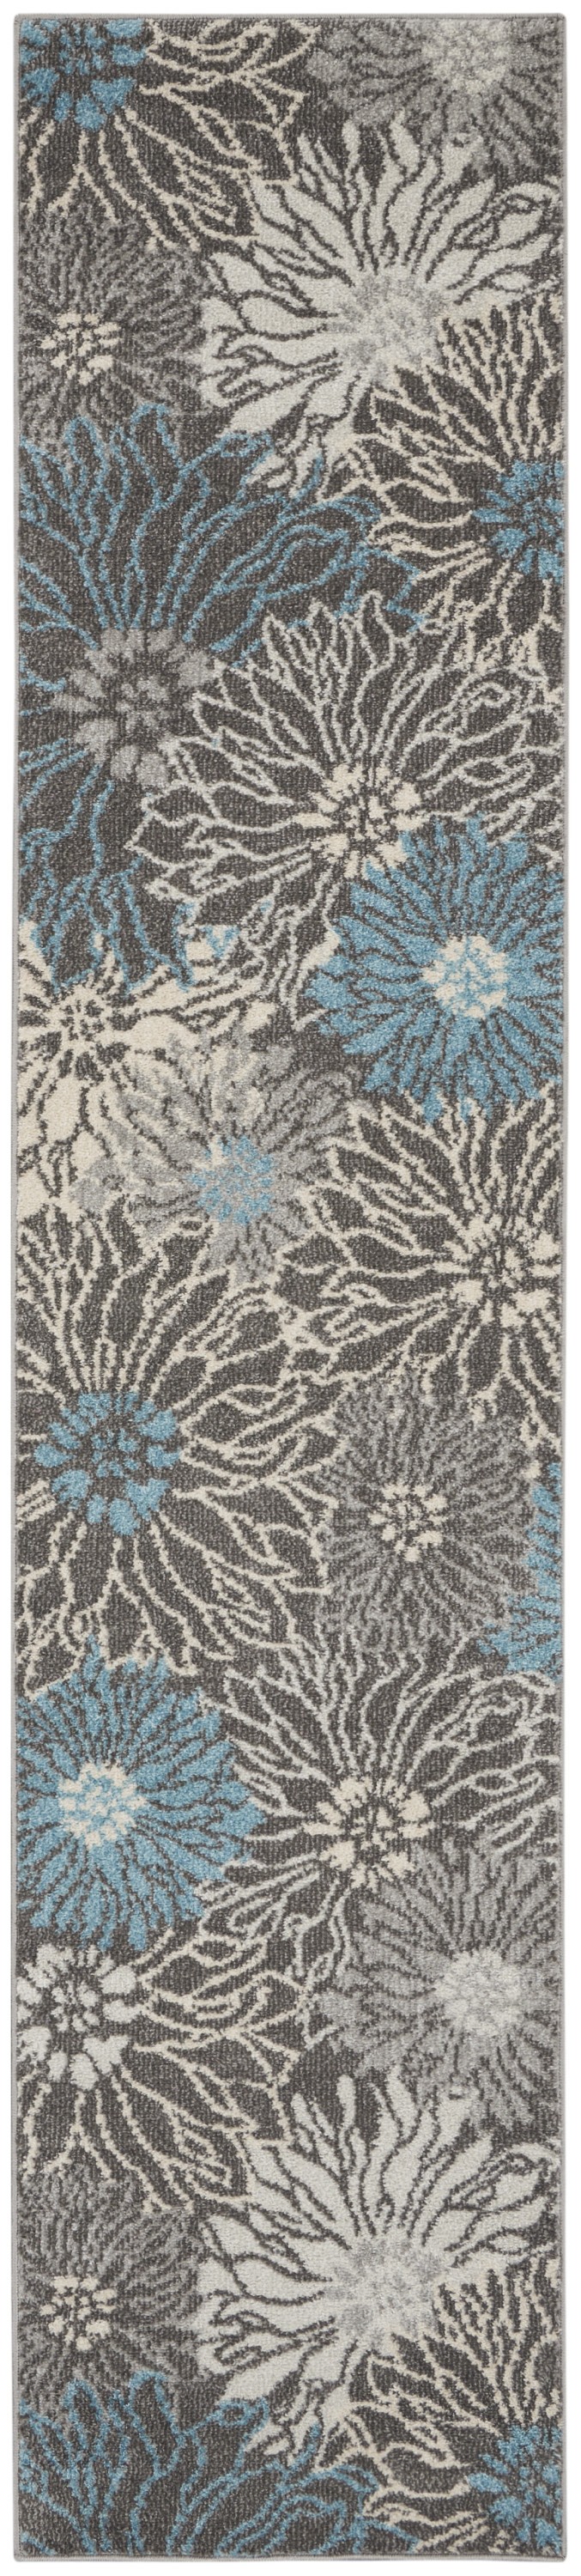 10' Blue And Gray Floral Power Loom Runner Rug-385410-1